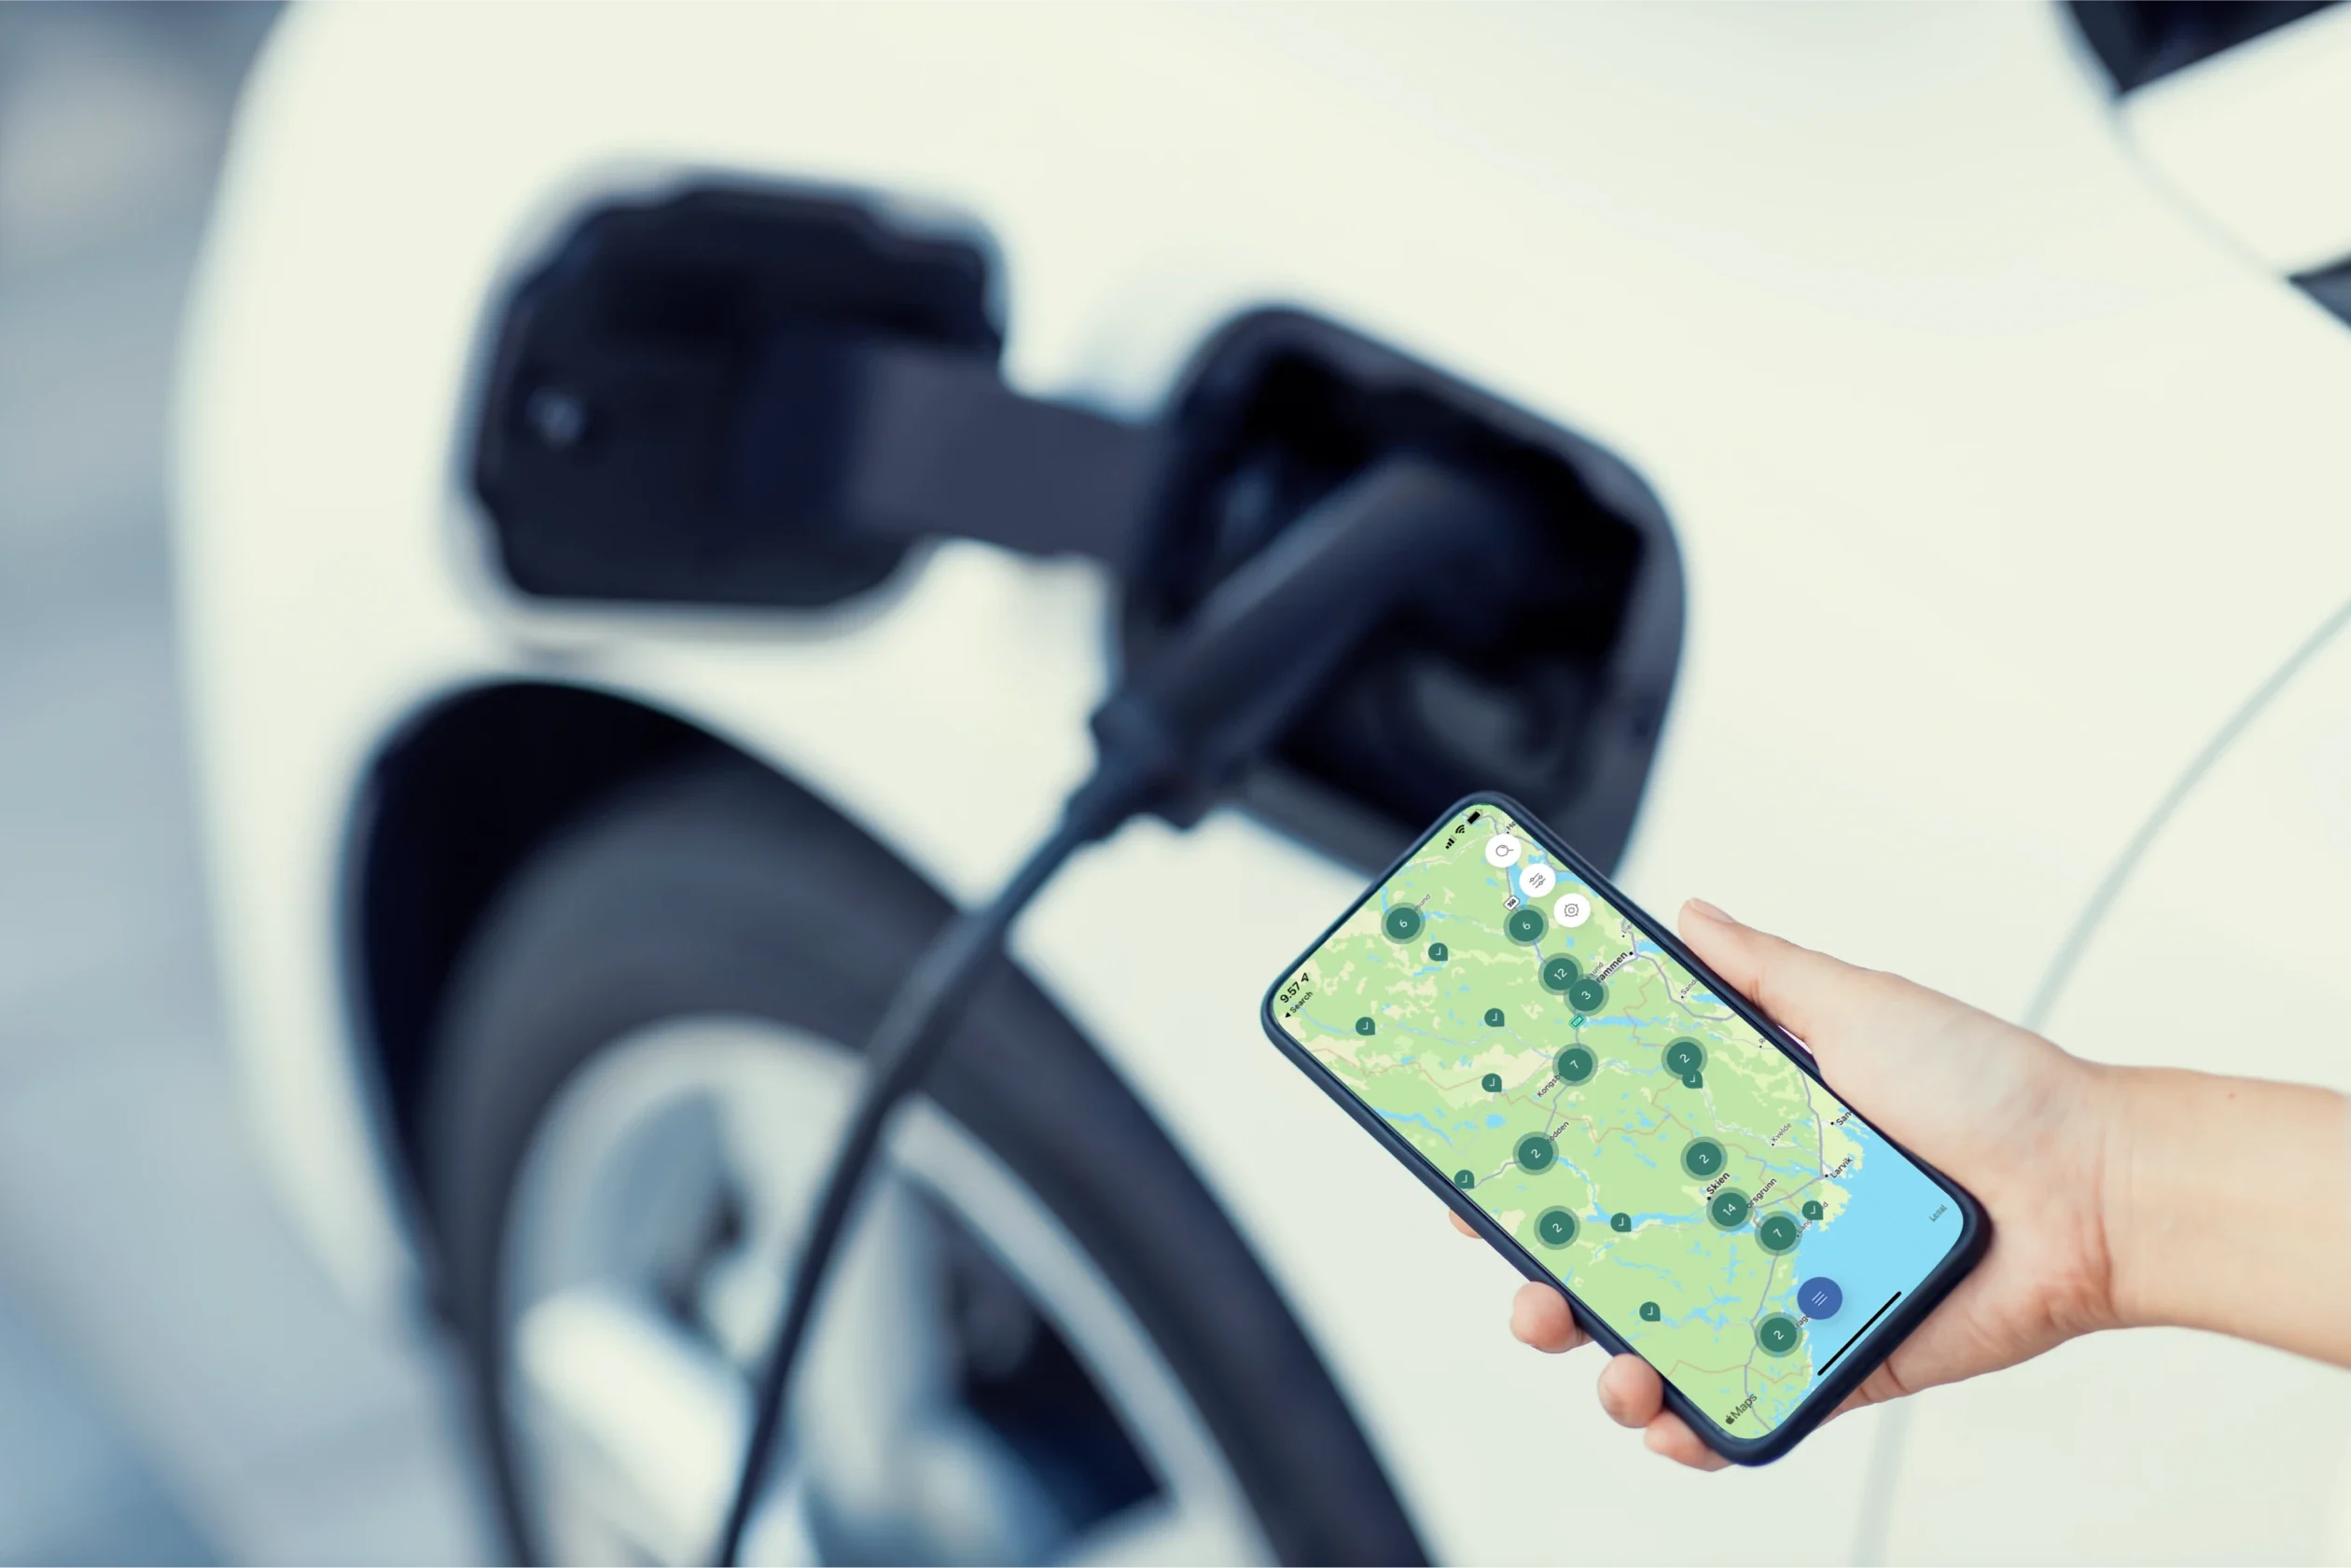 The Fortum Charge & Drive app